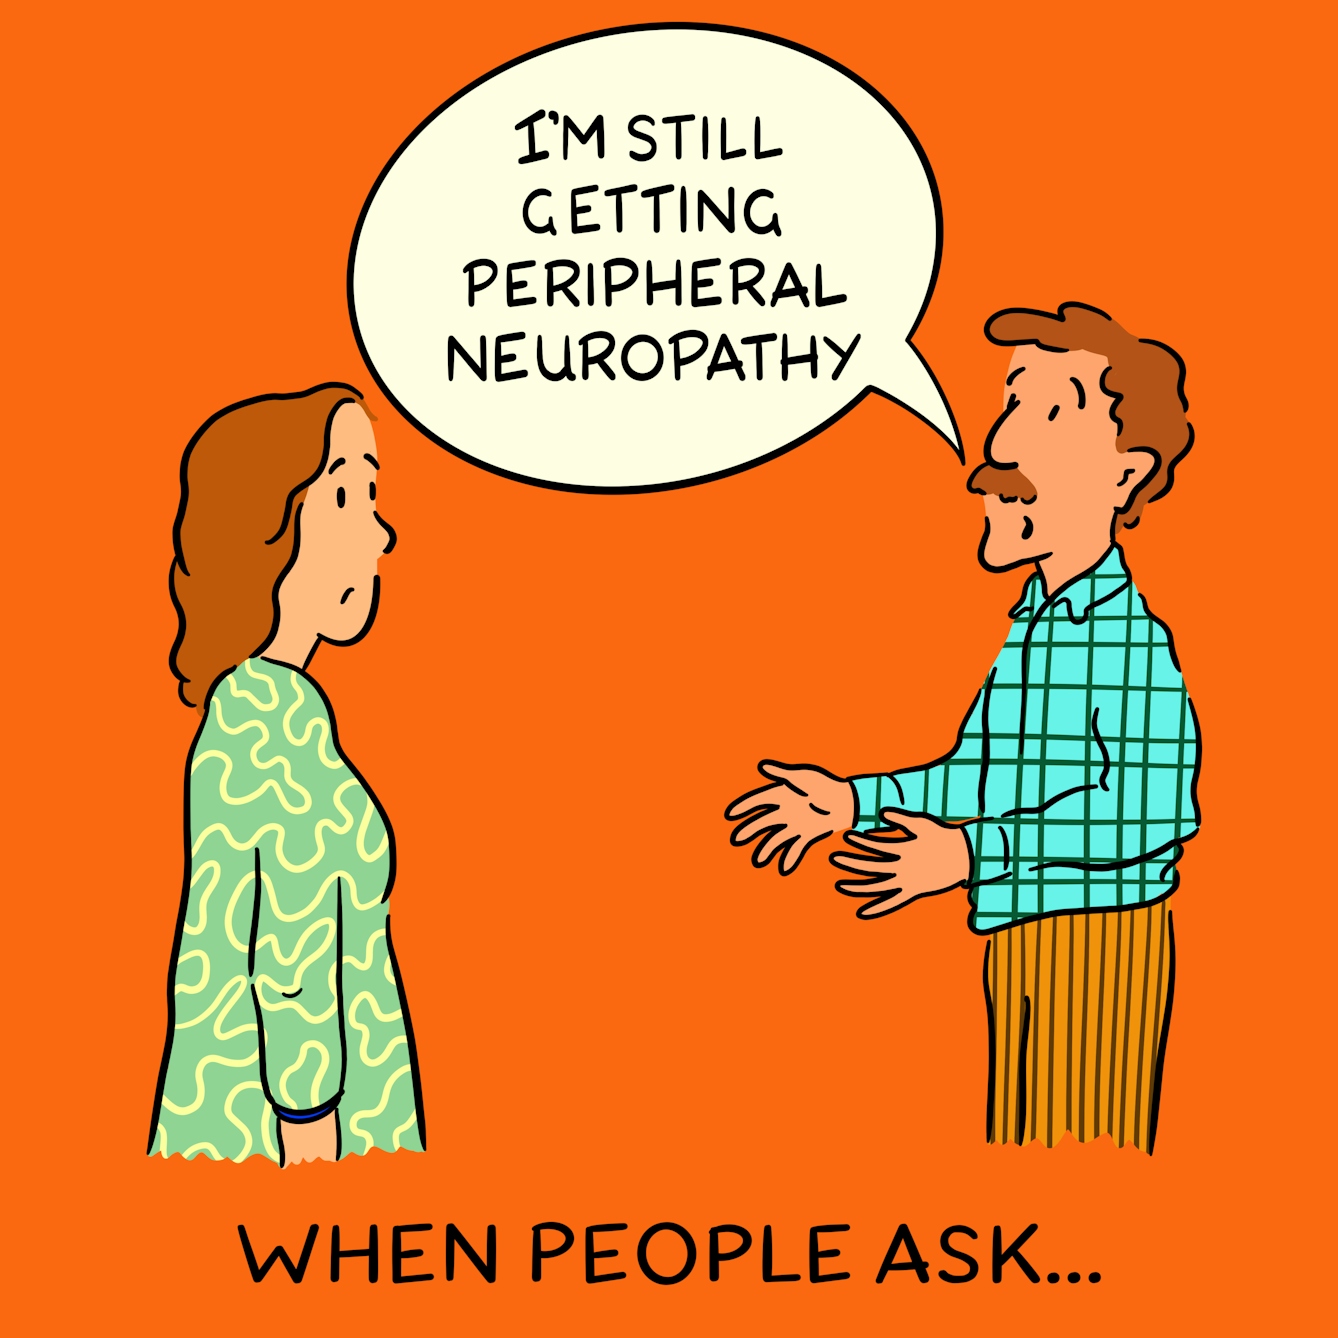 Panel 3 of a four-panel comic drawn digitally: a white man with a moustache in a plaid shirt says to a bemused white woman in a squiggly-patterned dress "I'm still getting peripheral neuropathy". The caption text reads "When people ask..."